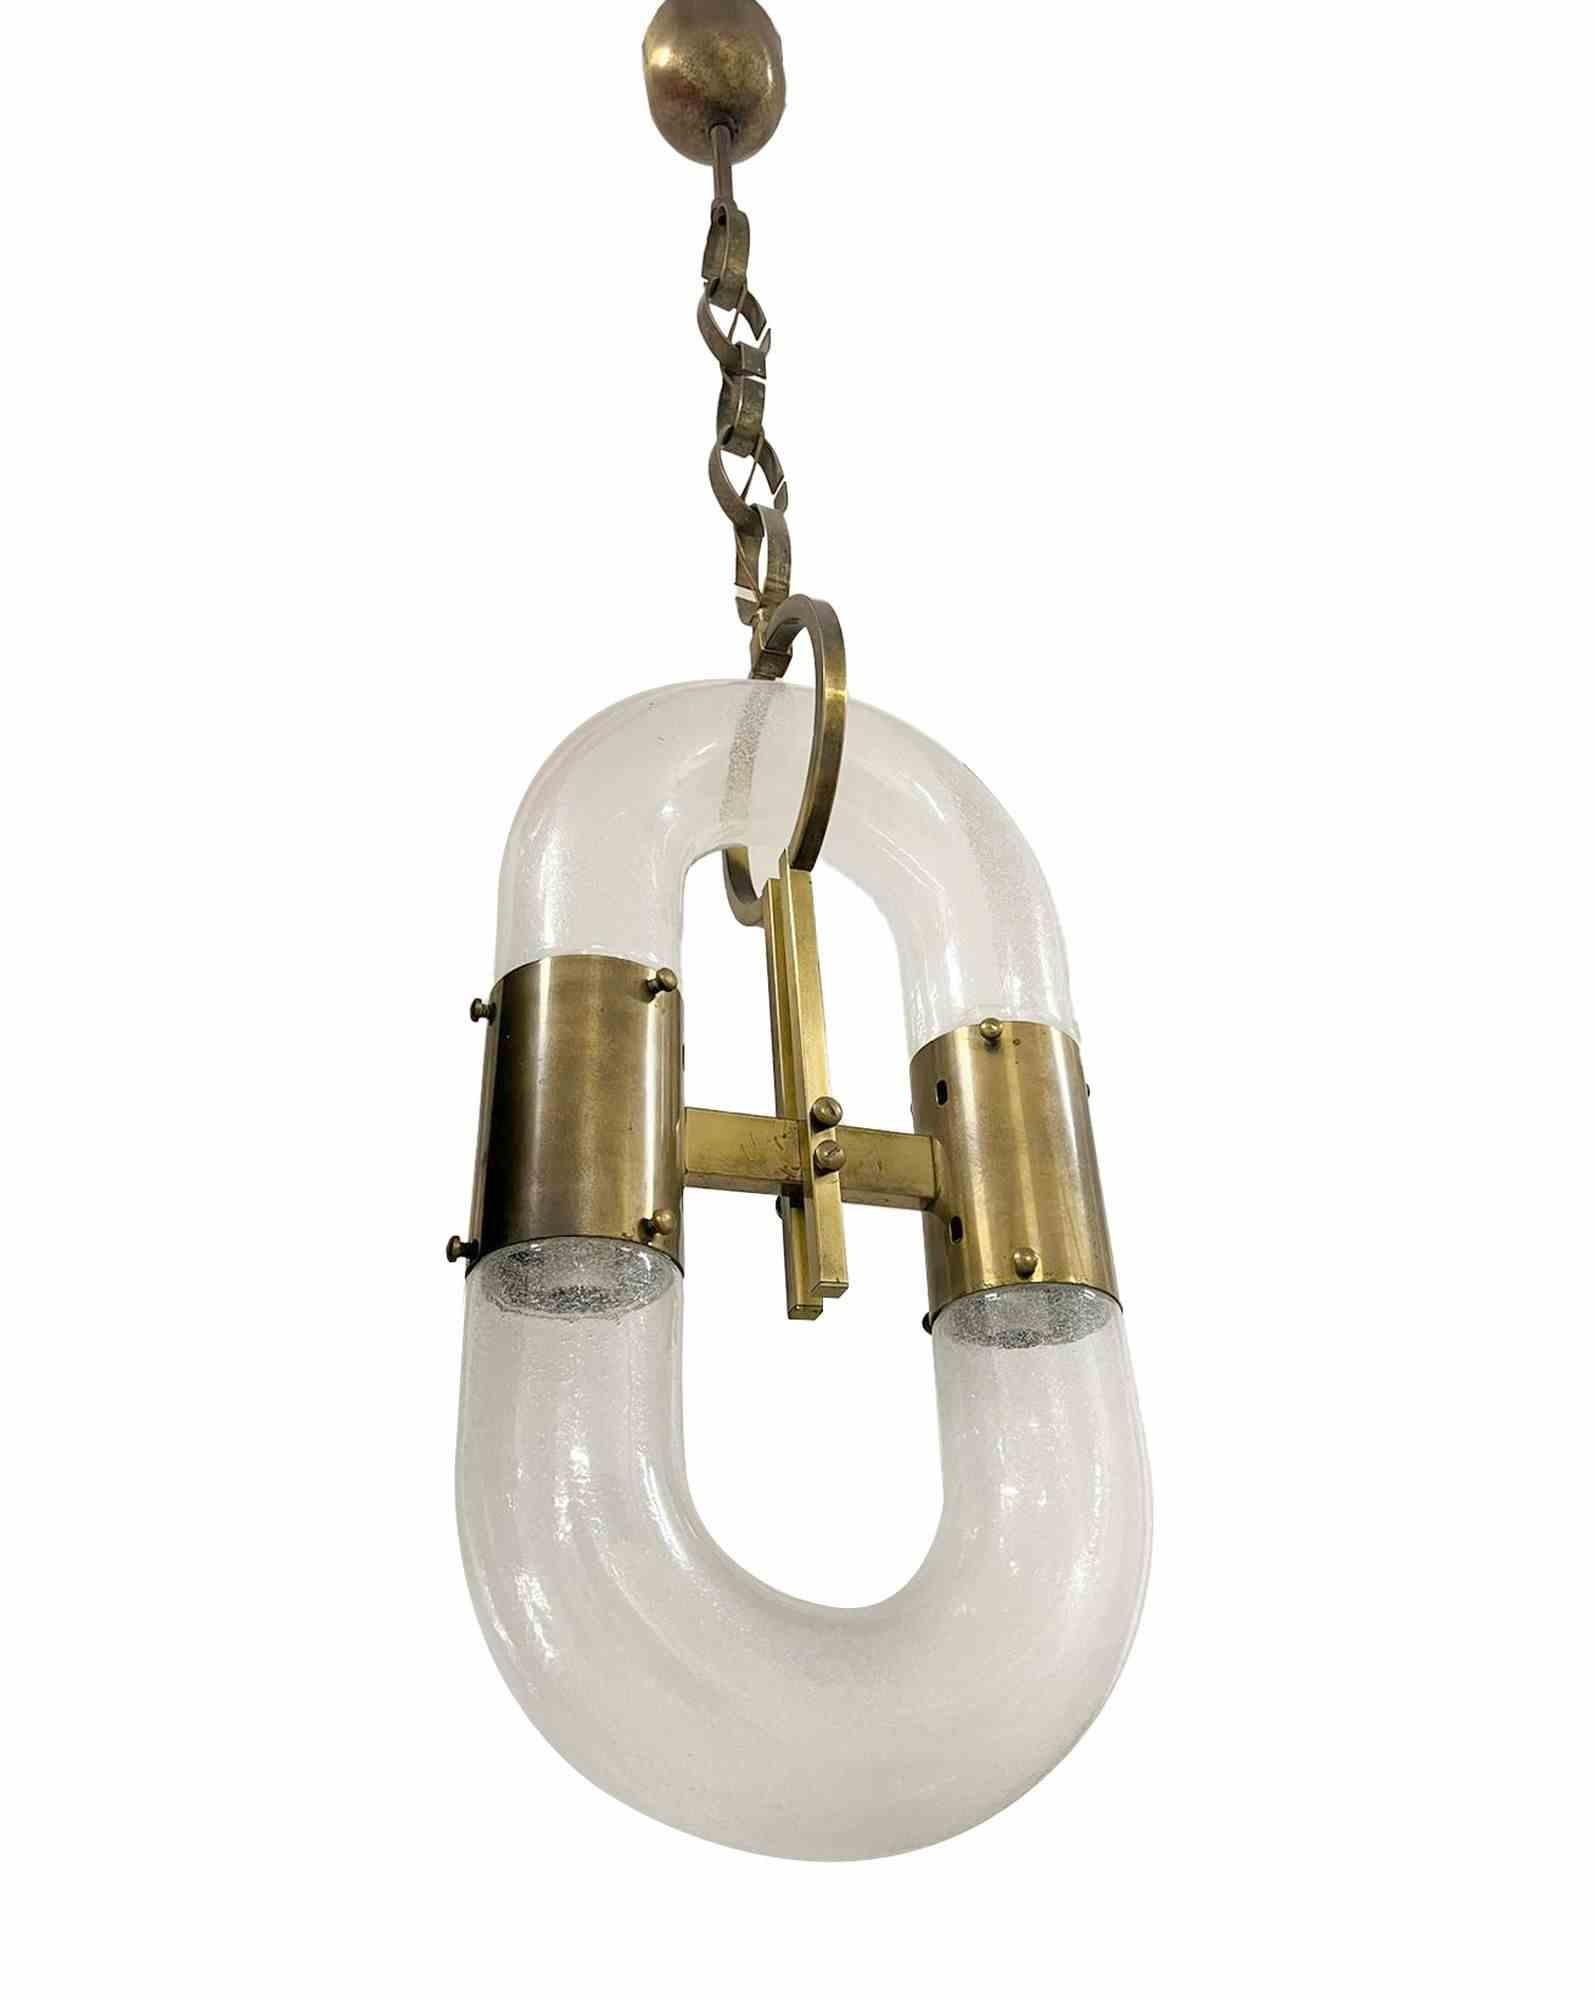 Chandelier Lamp by Carlo Nason for Mazzega, Italy 1970s.

Opaline Murano Glass and Brass.

H105 x 27 x 24 cm.

Good conditions!